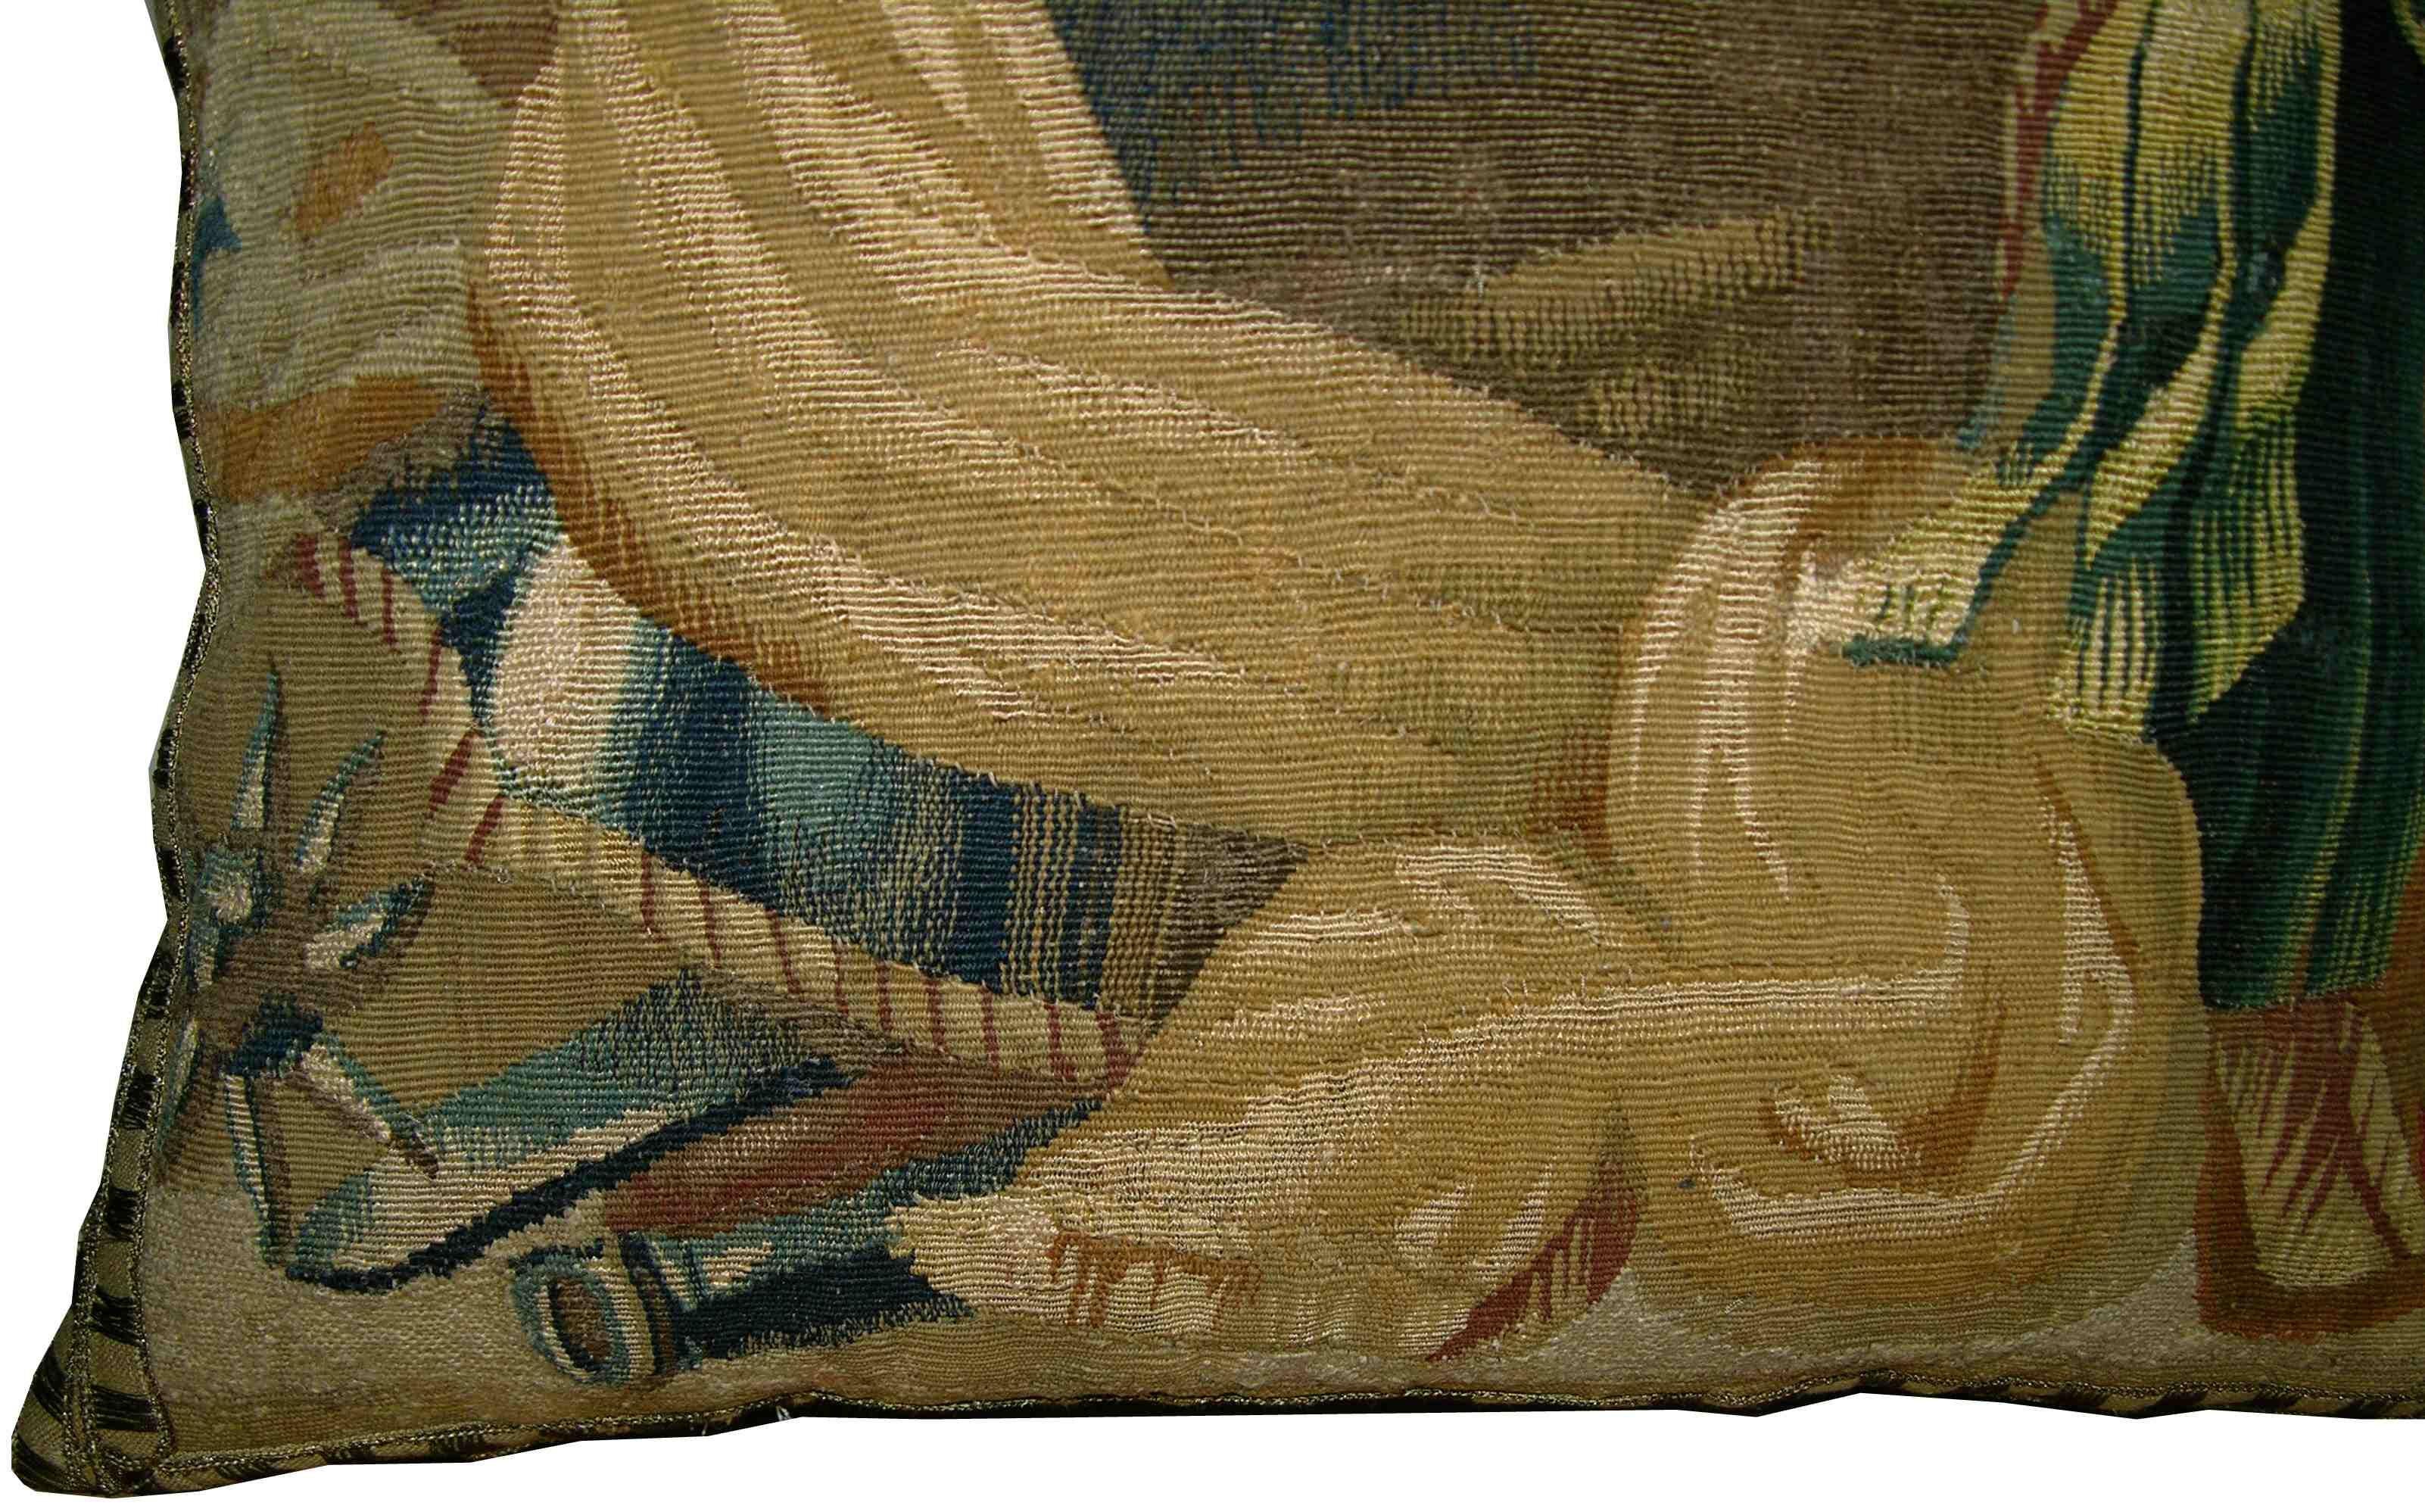 European Antique Brussels Tapestry Pillow, circa 17th Century For Sale